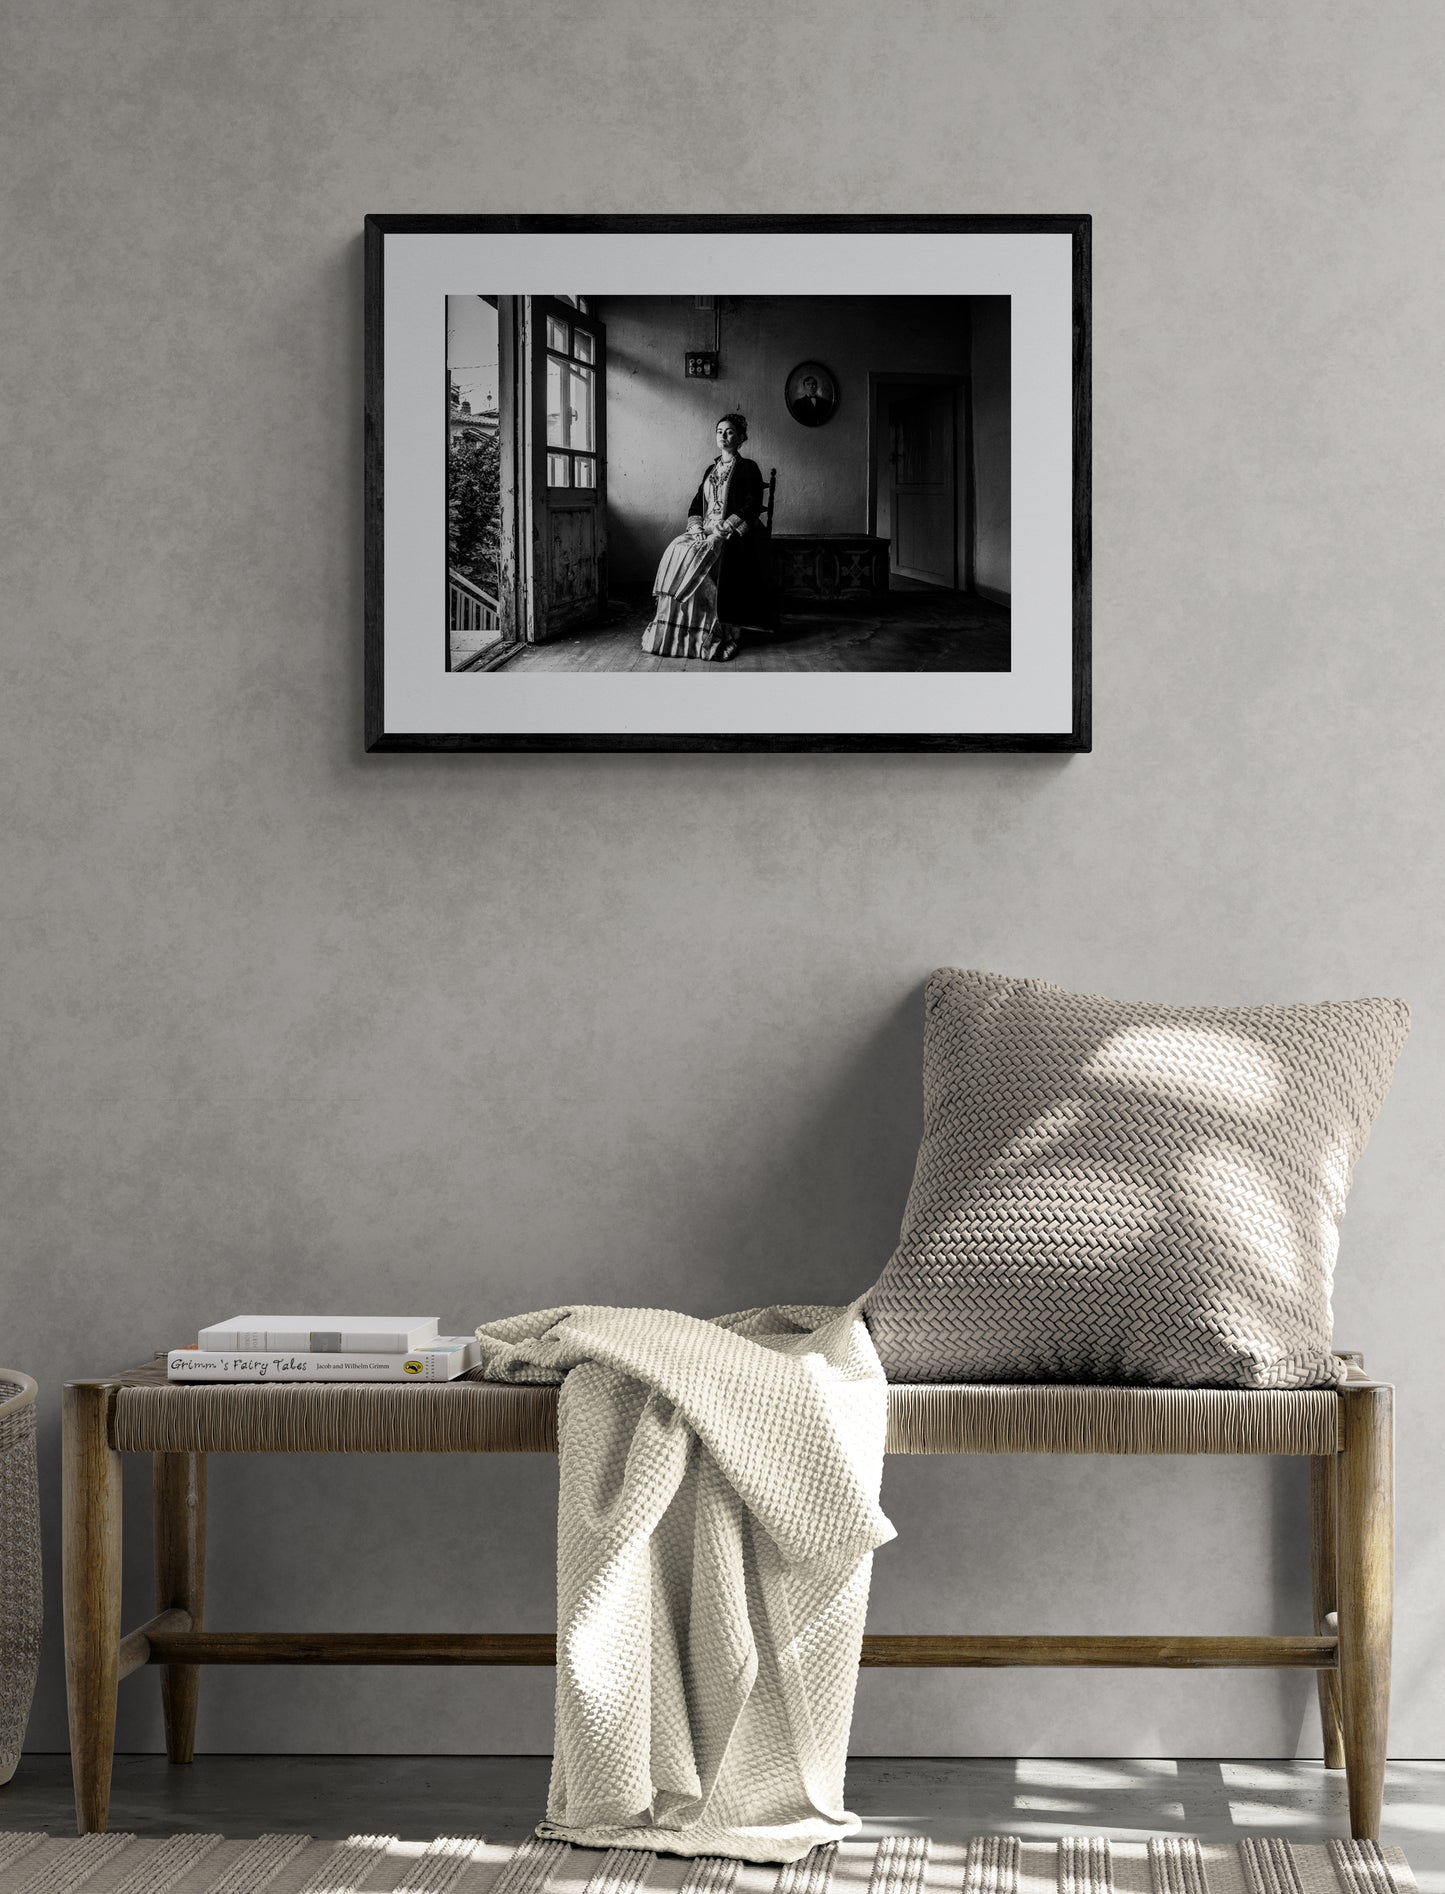 Black and White Photography Wall Art Greece | Costumes of Veria Macedonia by George Tatakis - single framed photo